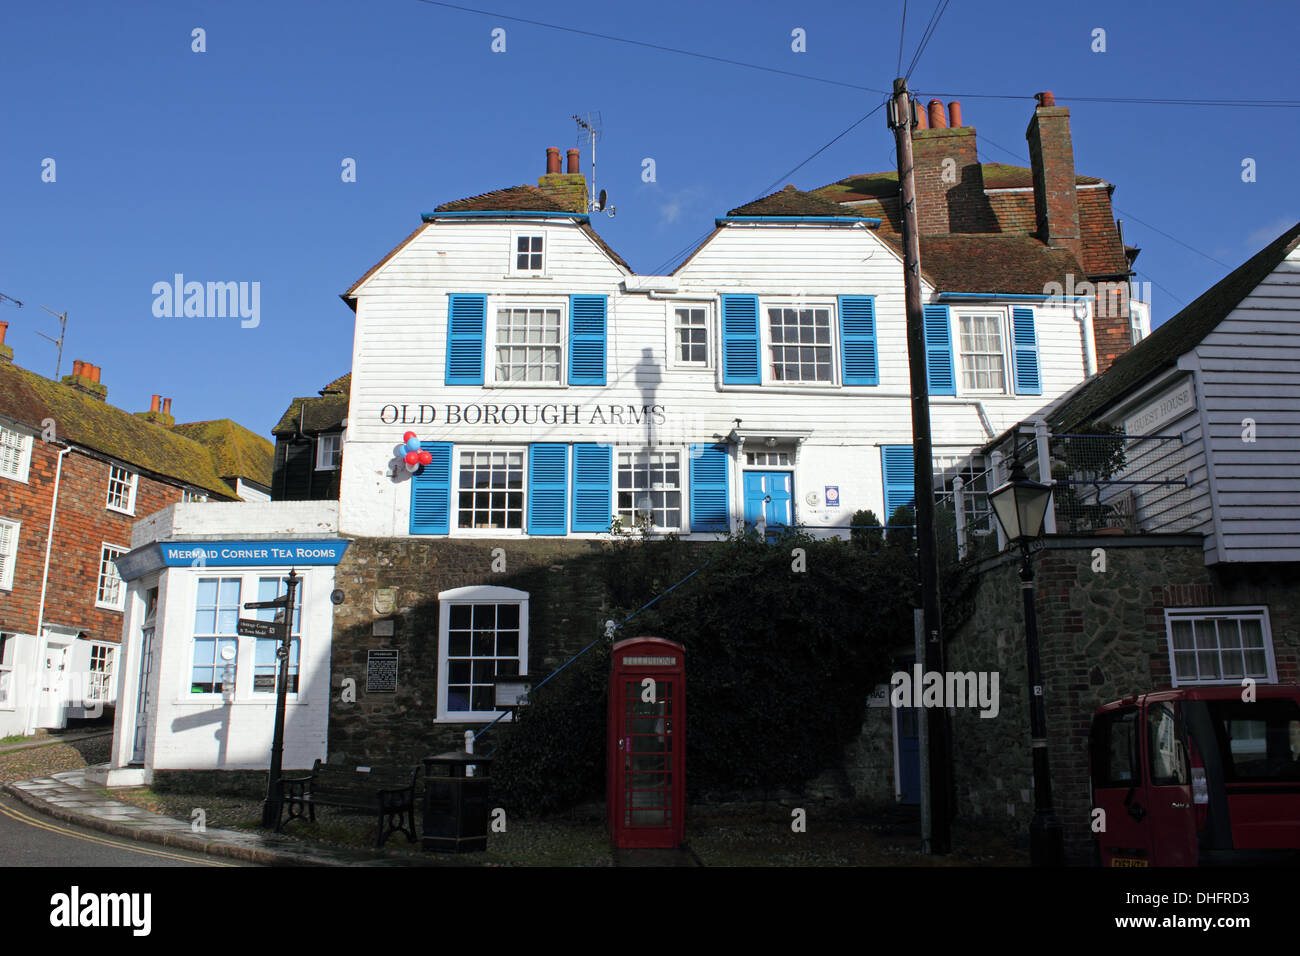 Old Borough Arms pub in The historic town of Rye in East Sussex, England UK Stock Photo